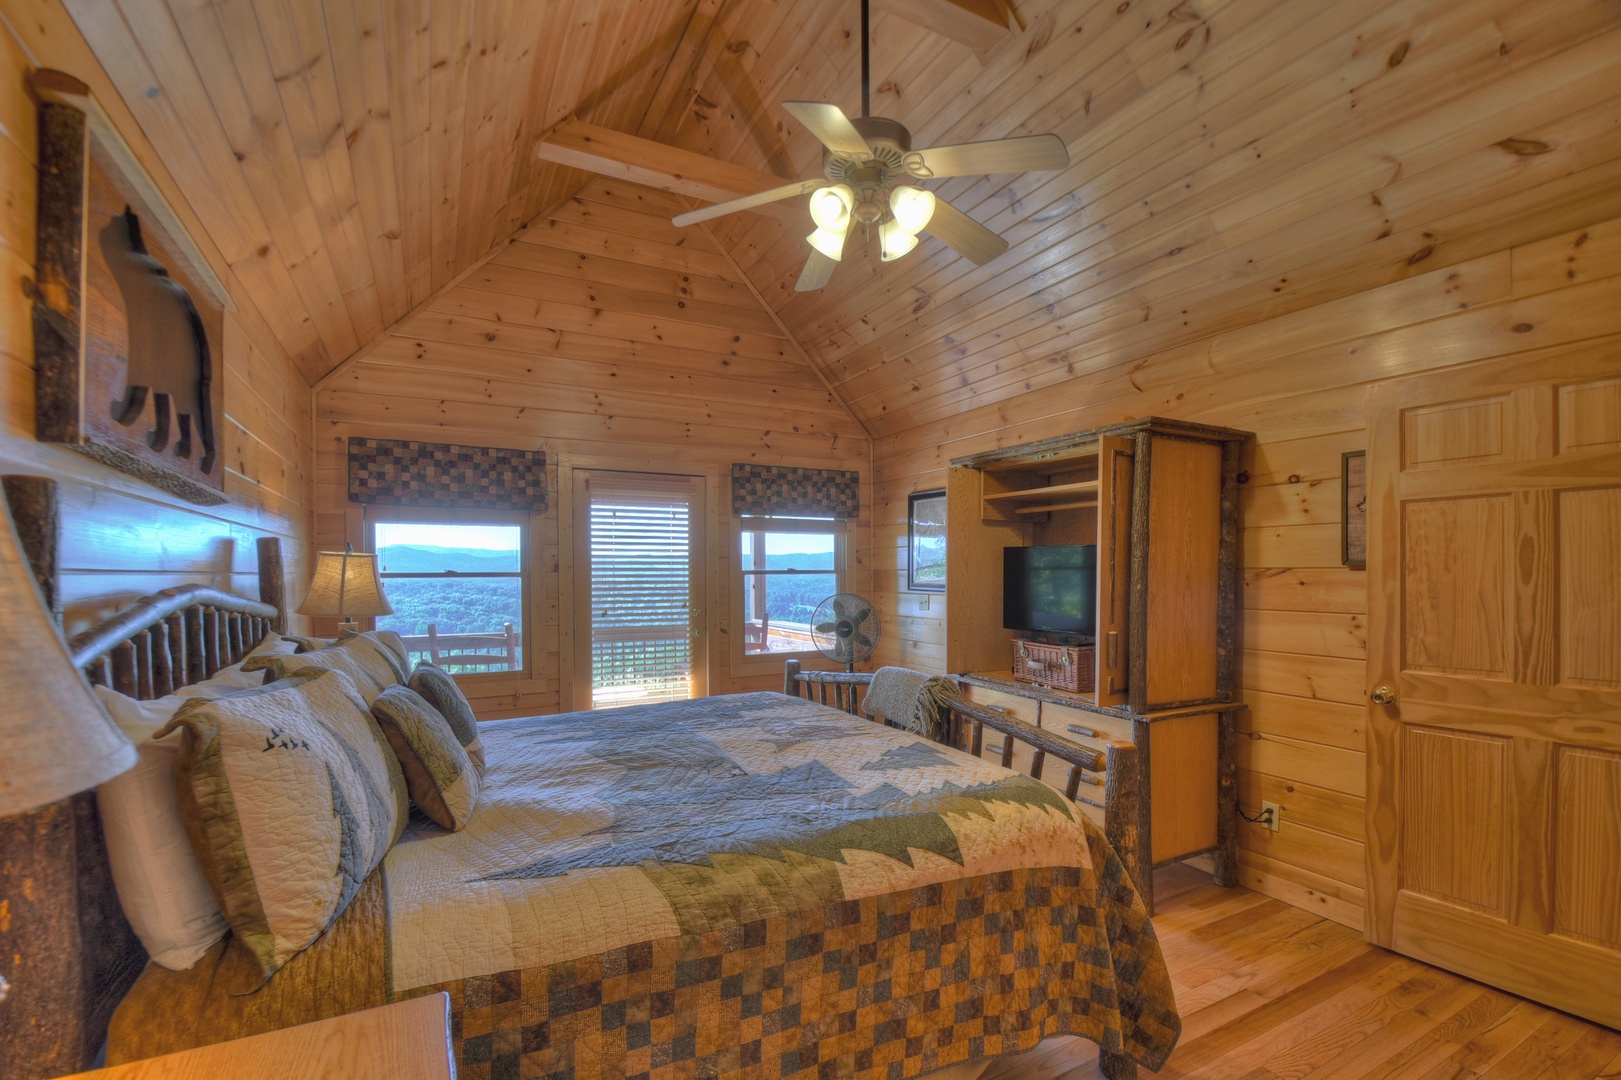 Sunrock Mountain Hideaway- Upstairs king master bedroom with private balcony